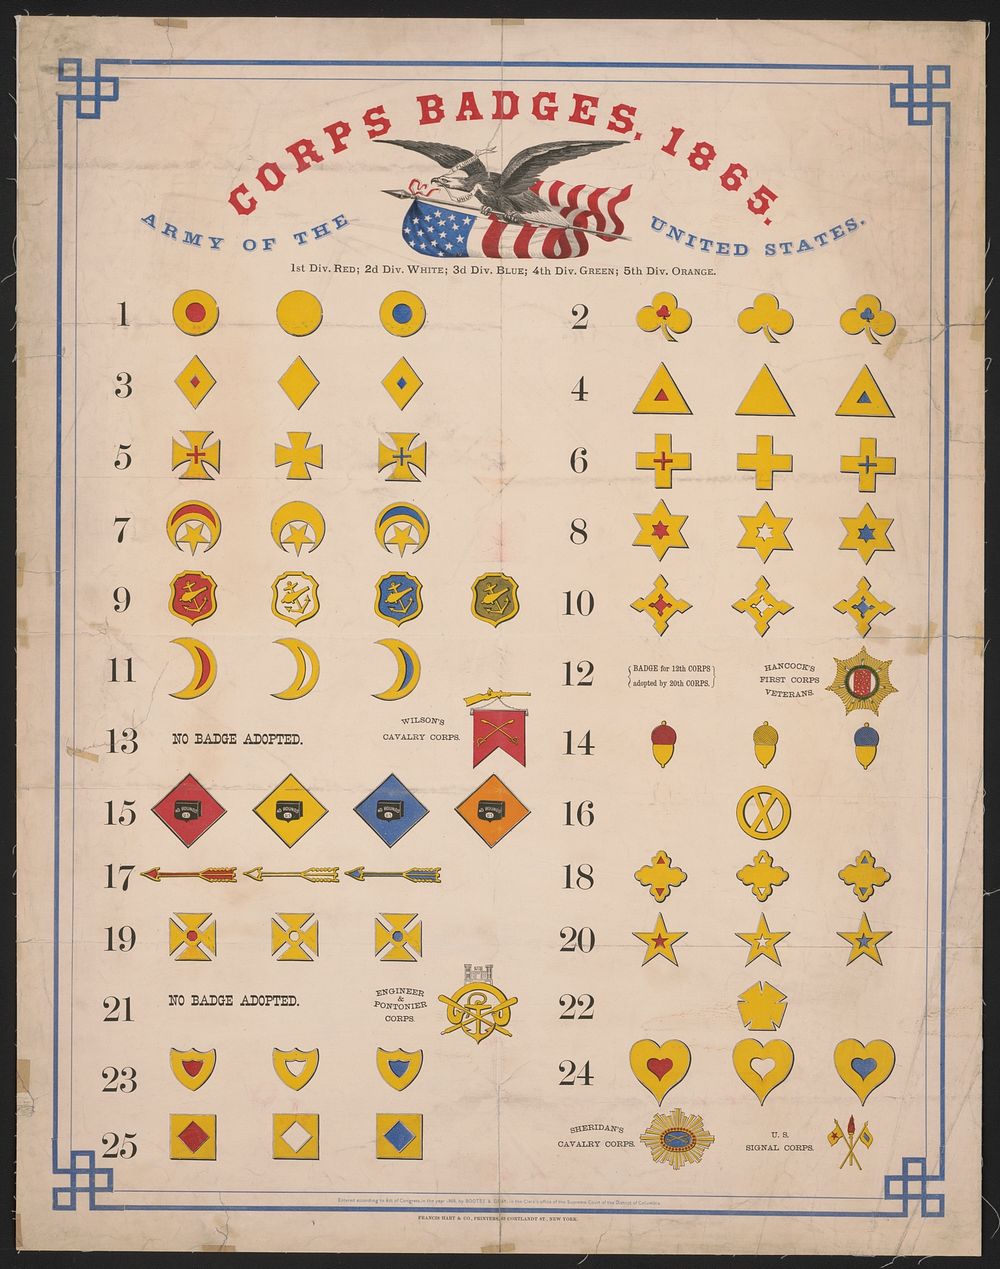 Army of the United States, corps badges, 1865